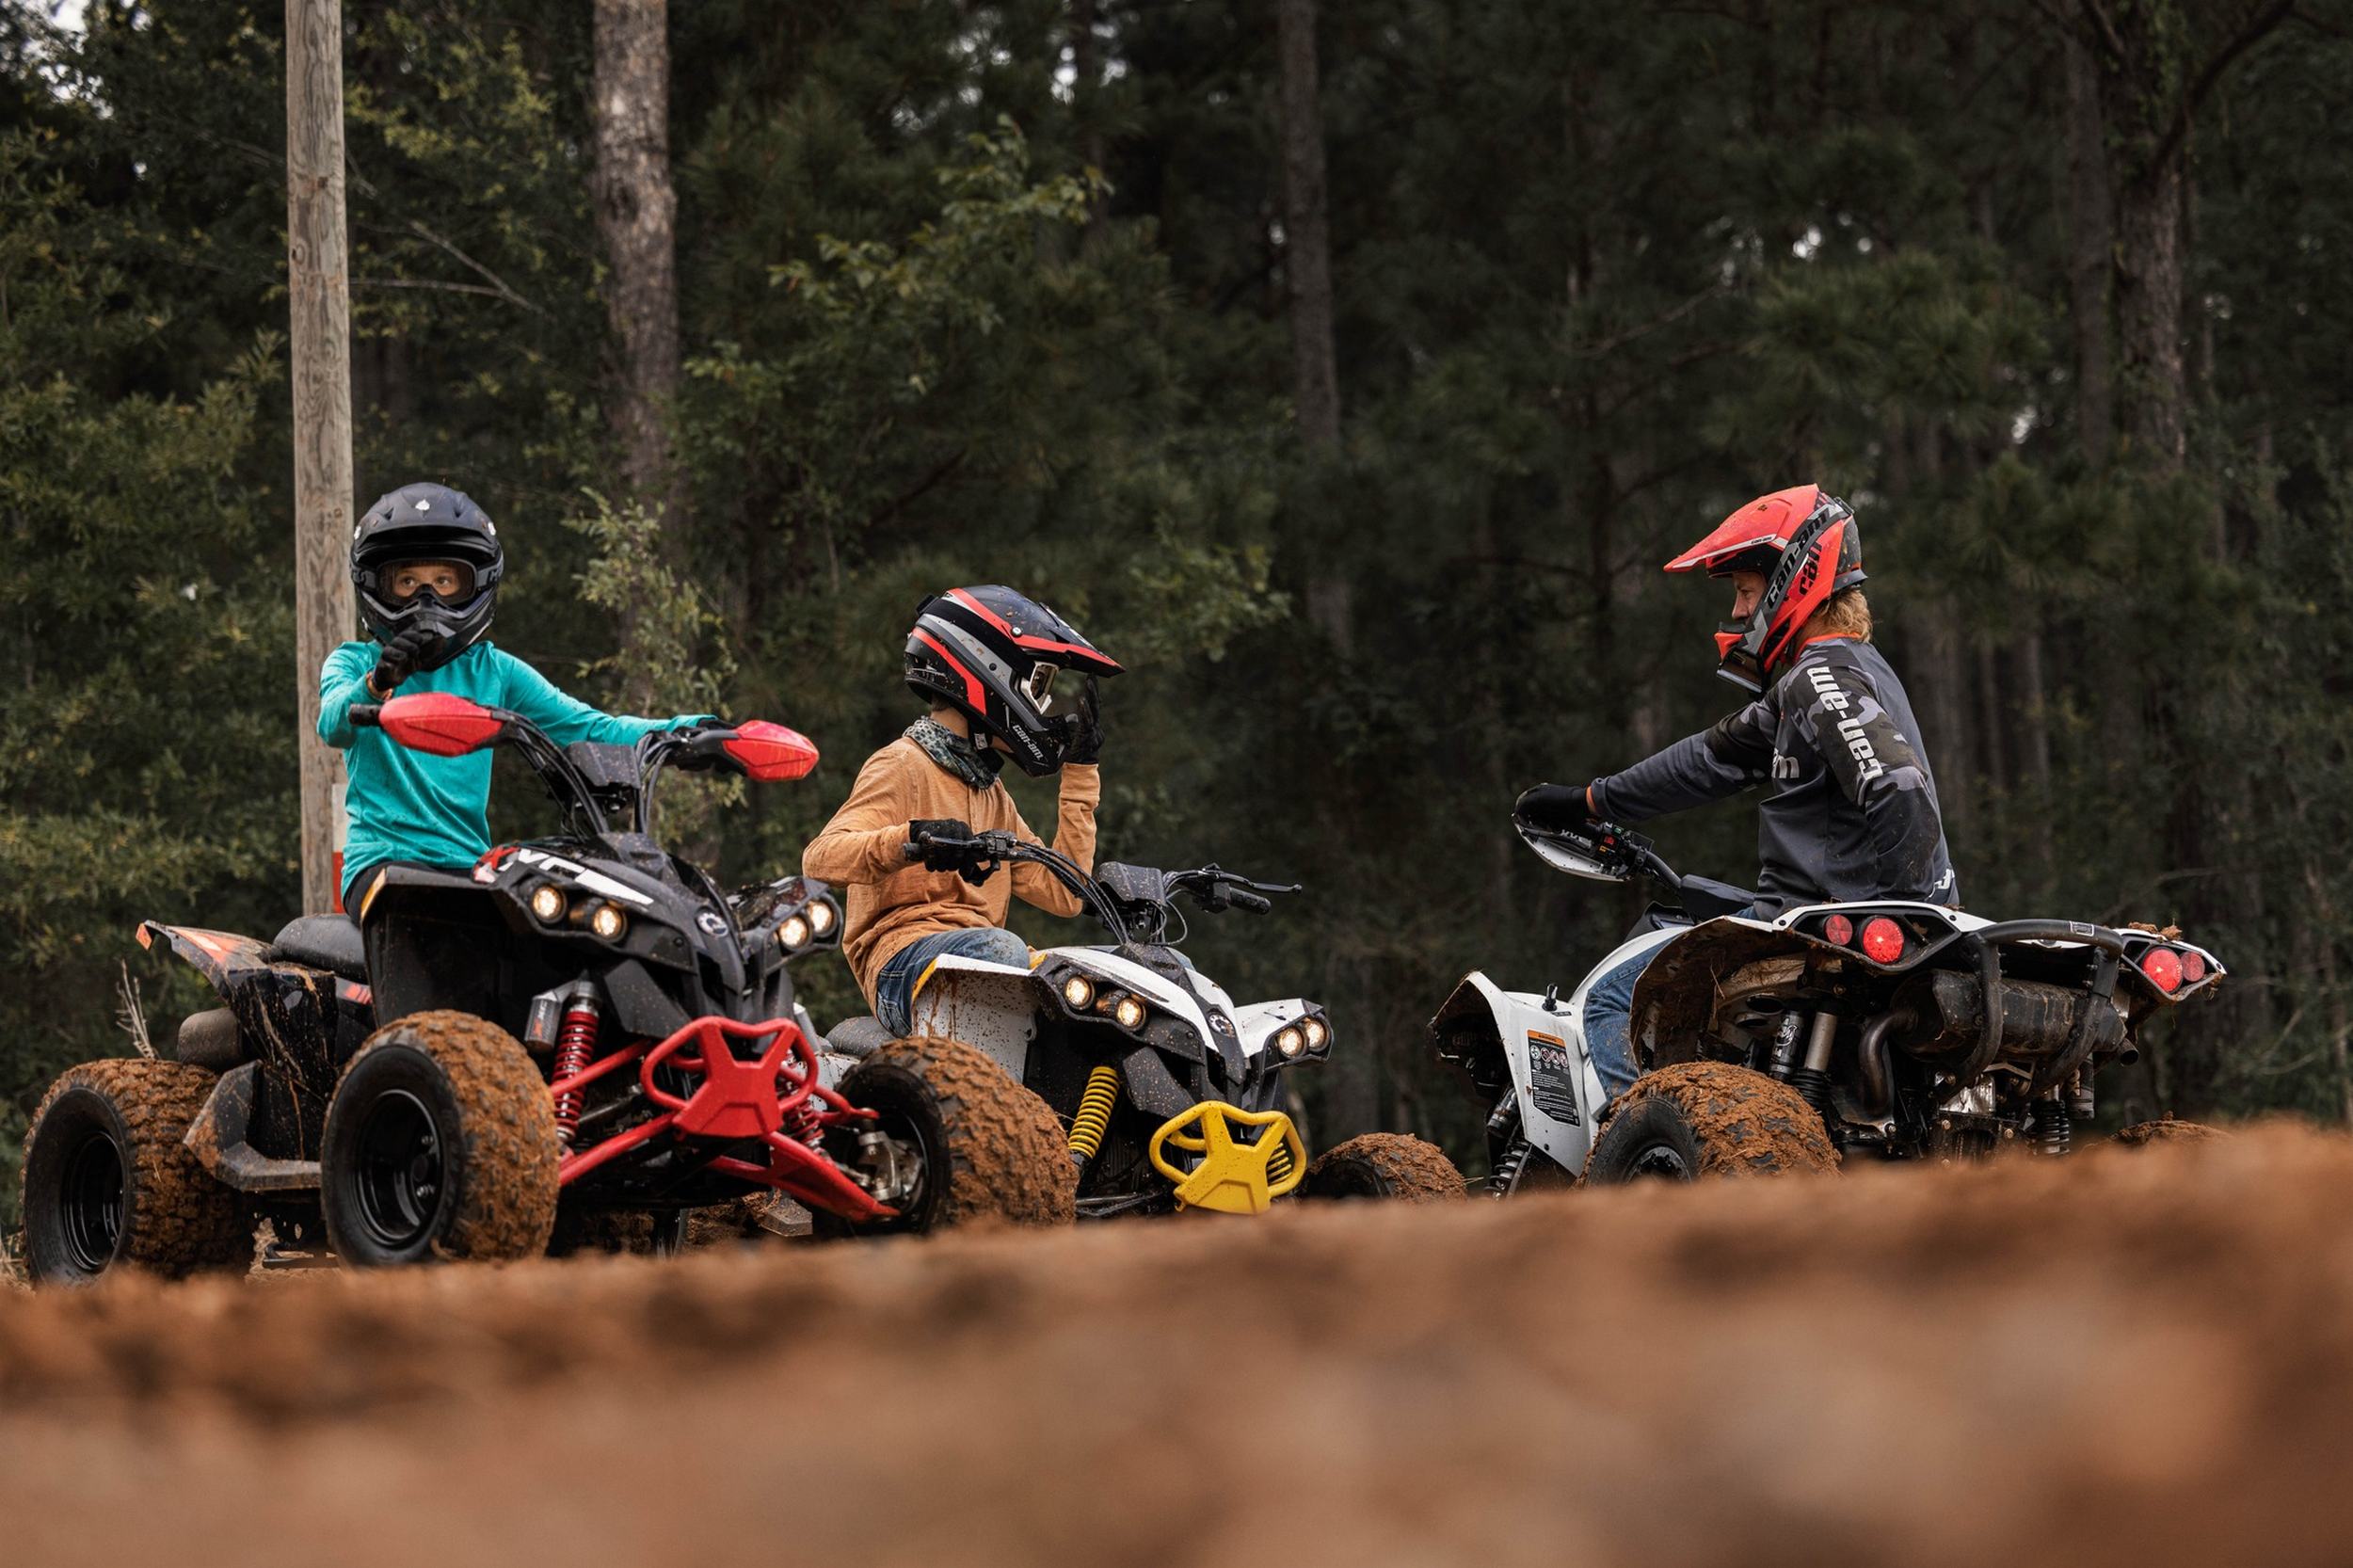 Three enthusiastic kids enjoying an exhilarating ride on the best youth ATVs along a rustic wooden mud trail